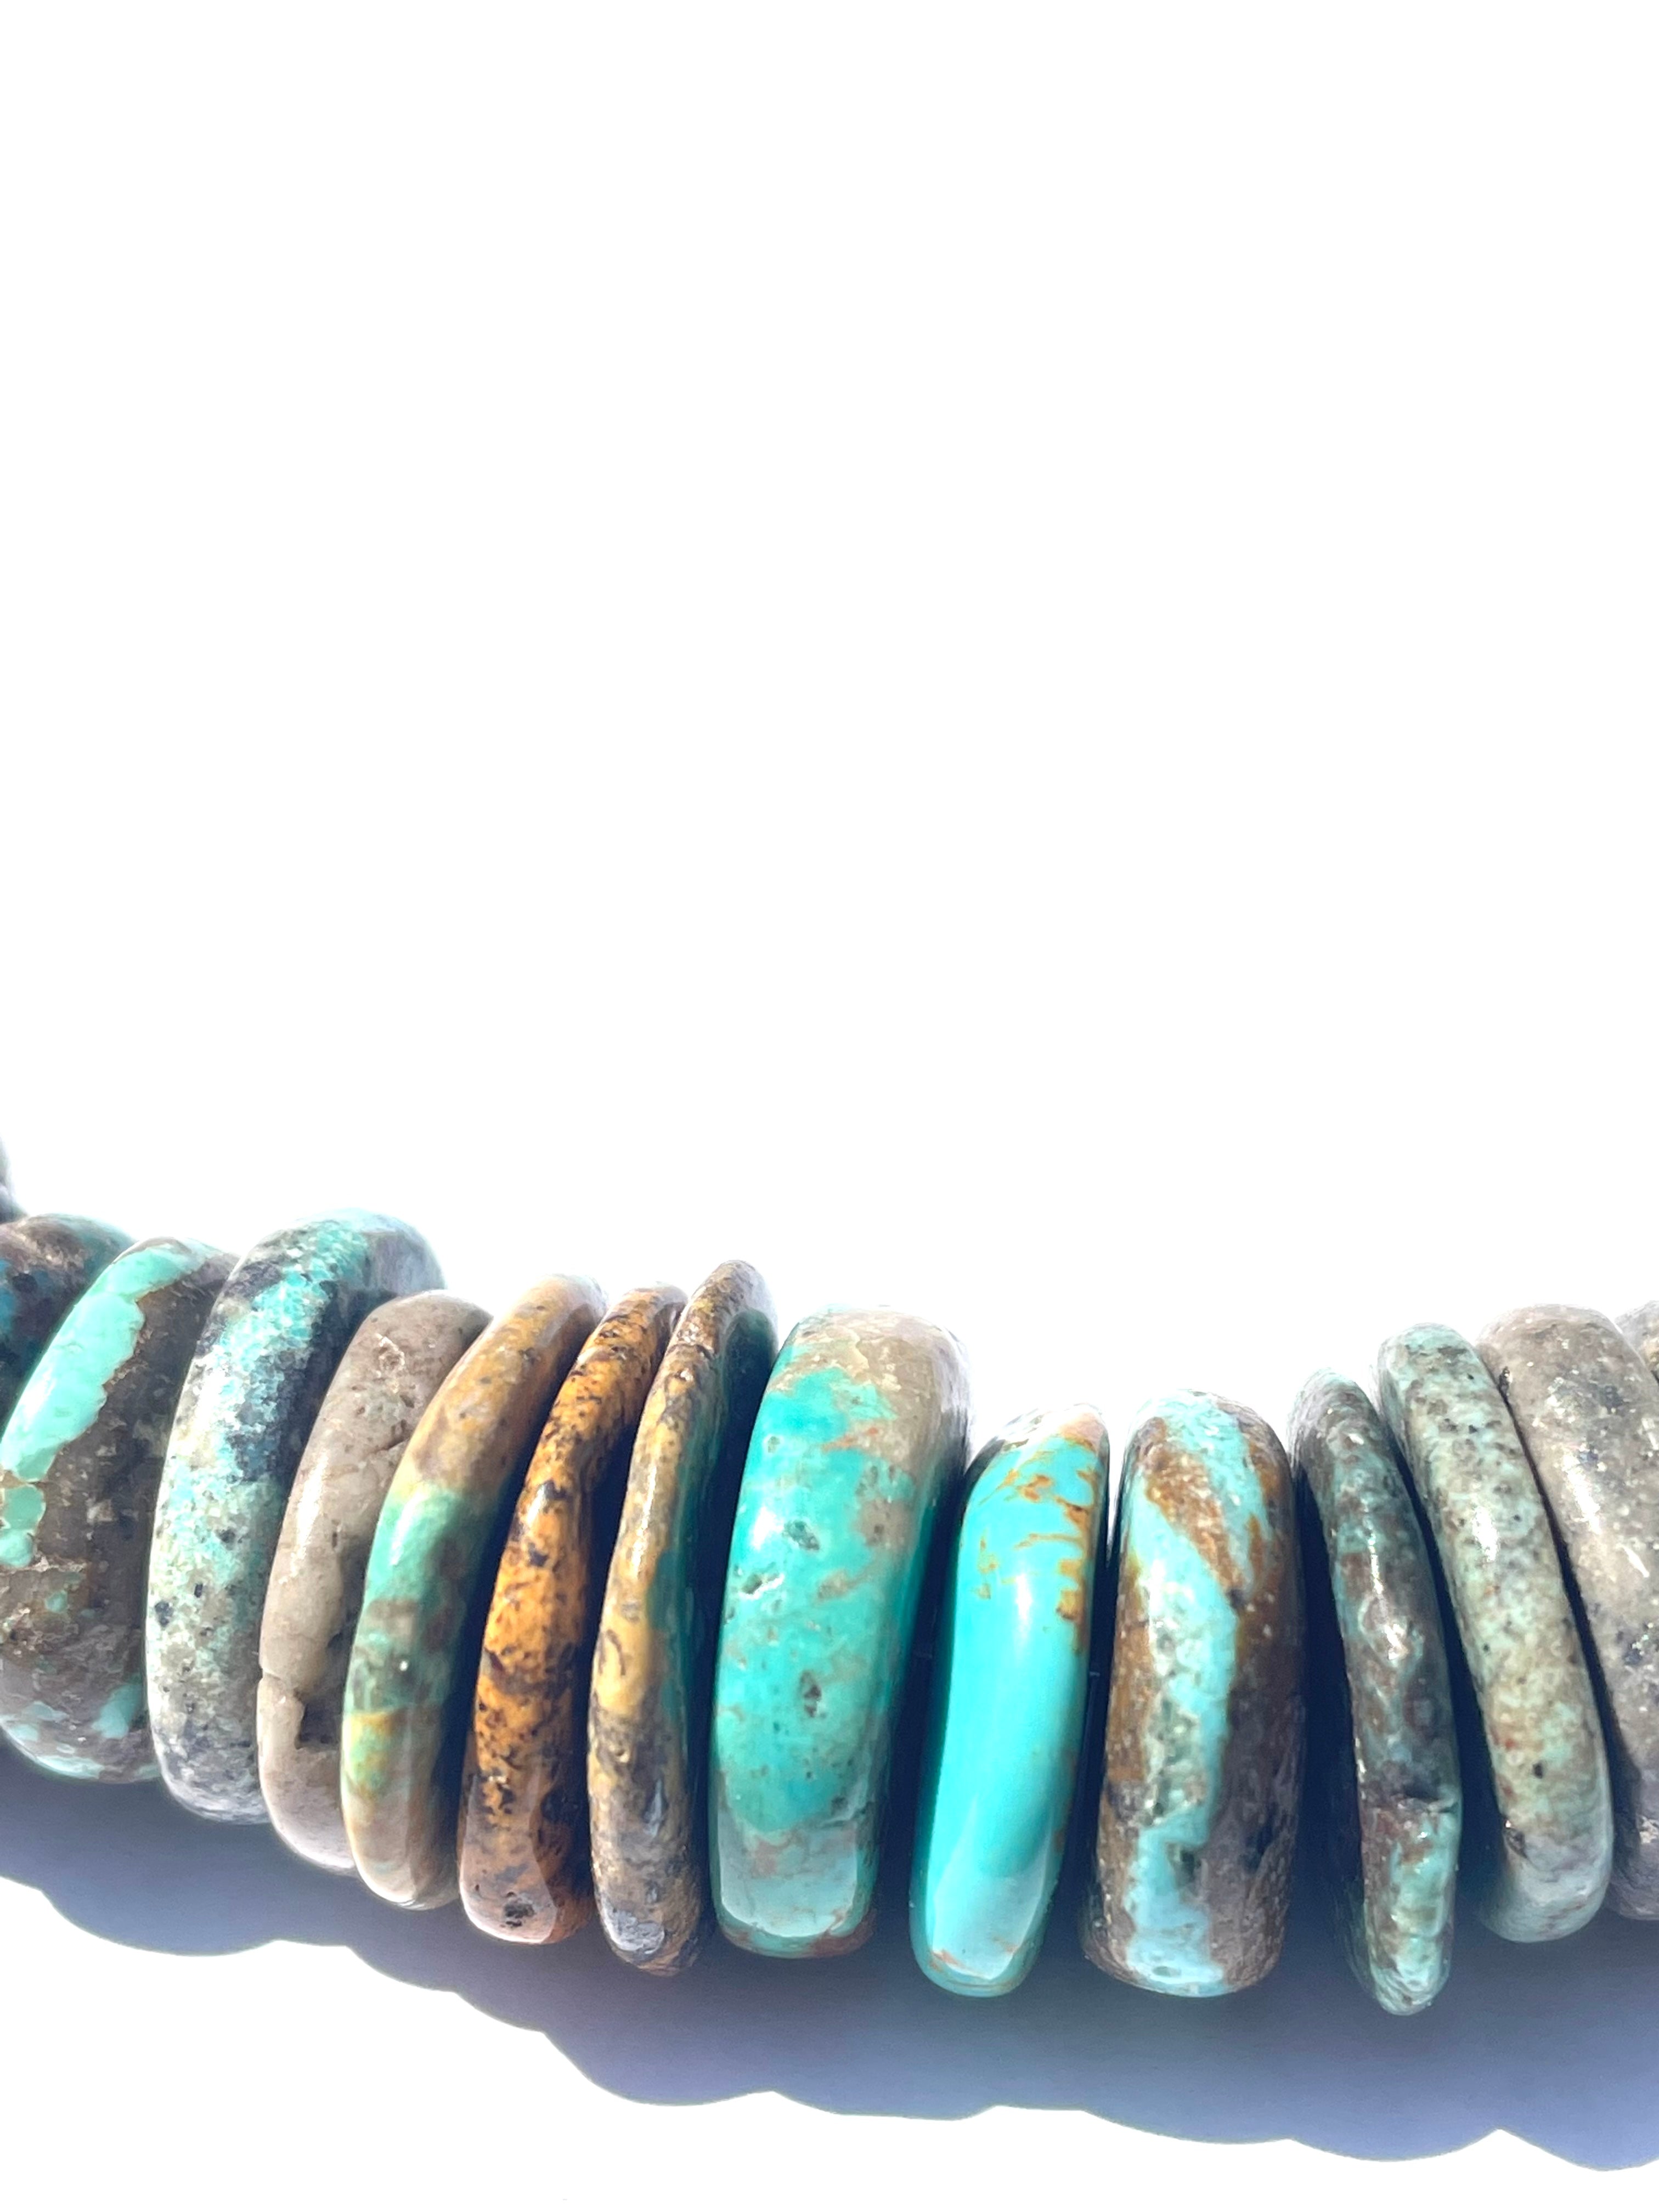 Turquoise necklaces Amazing stacked short 18 inch necklace